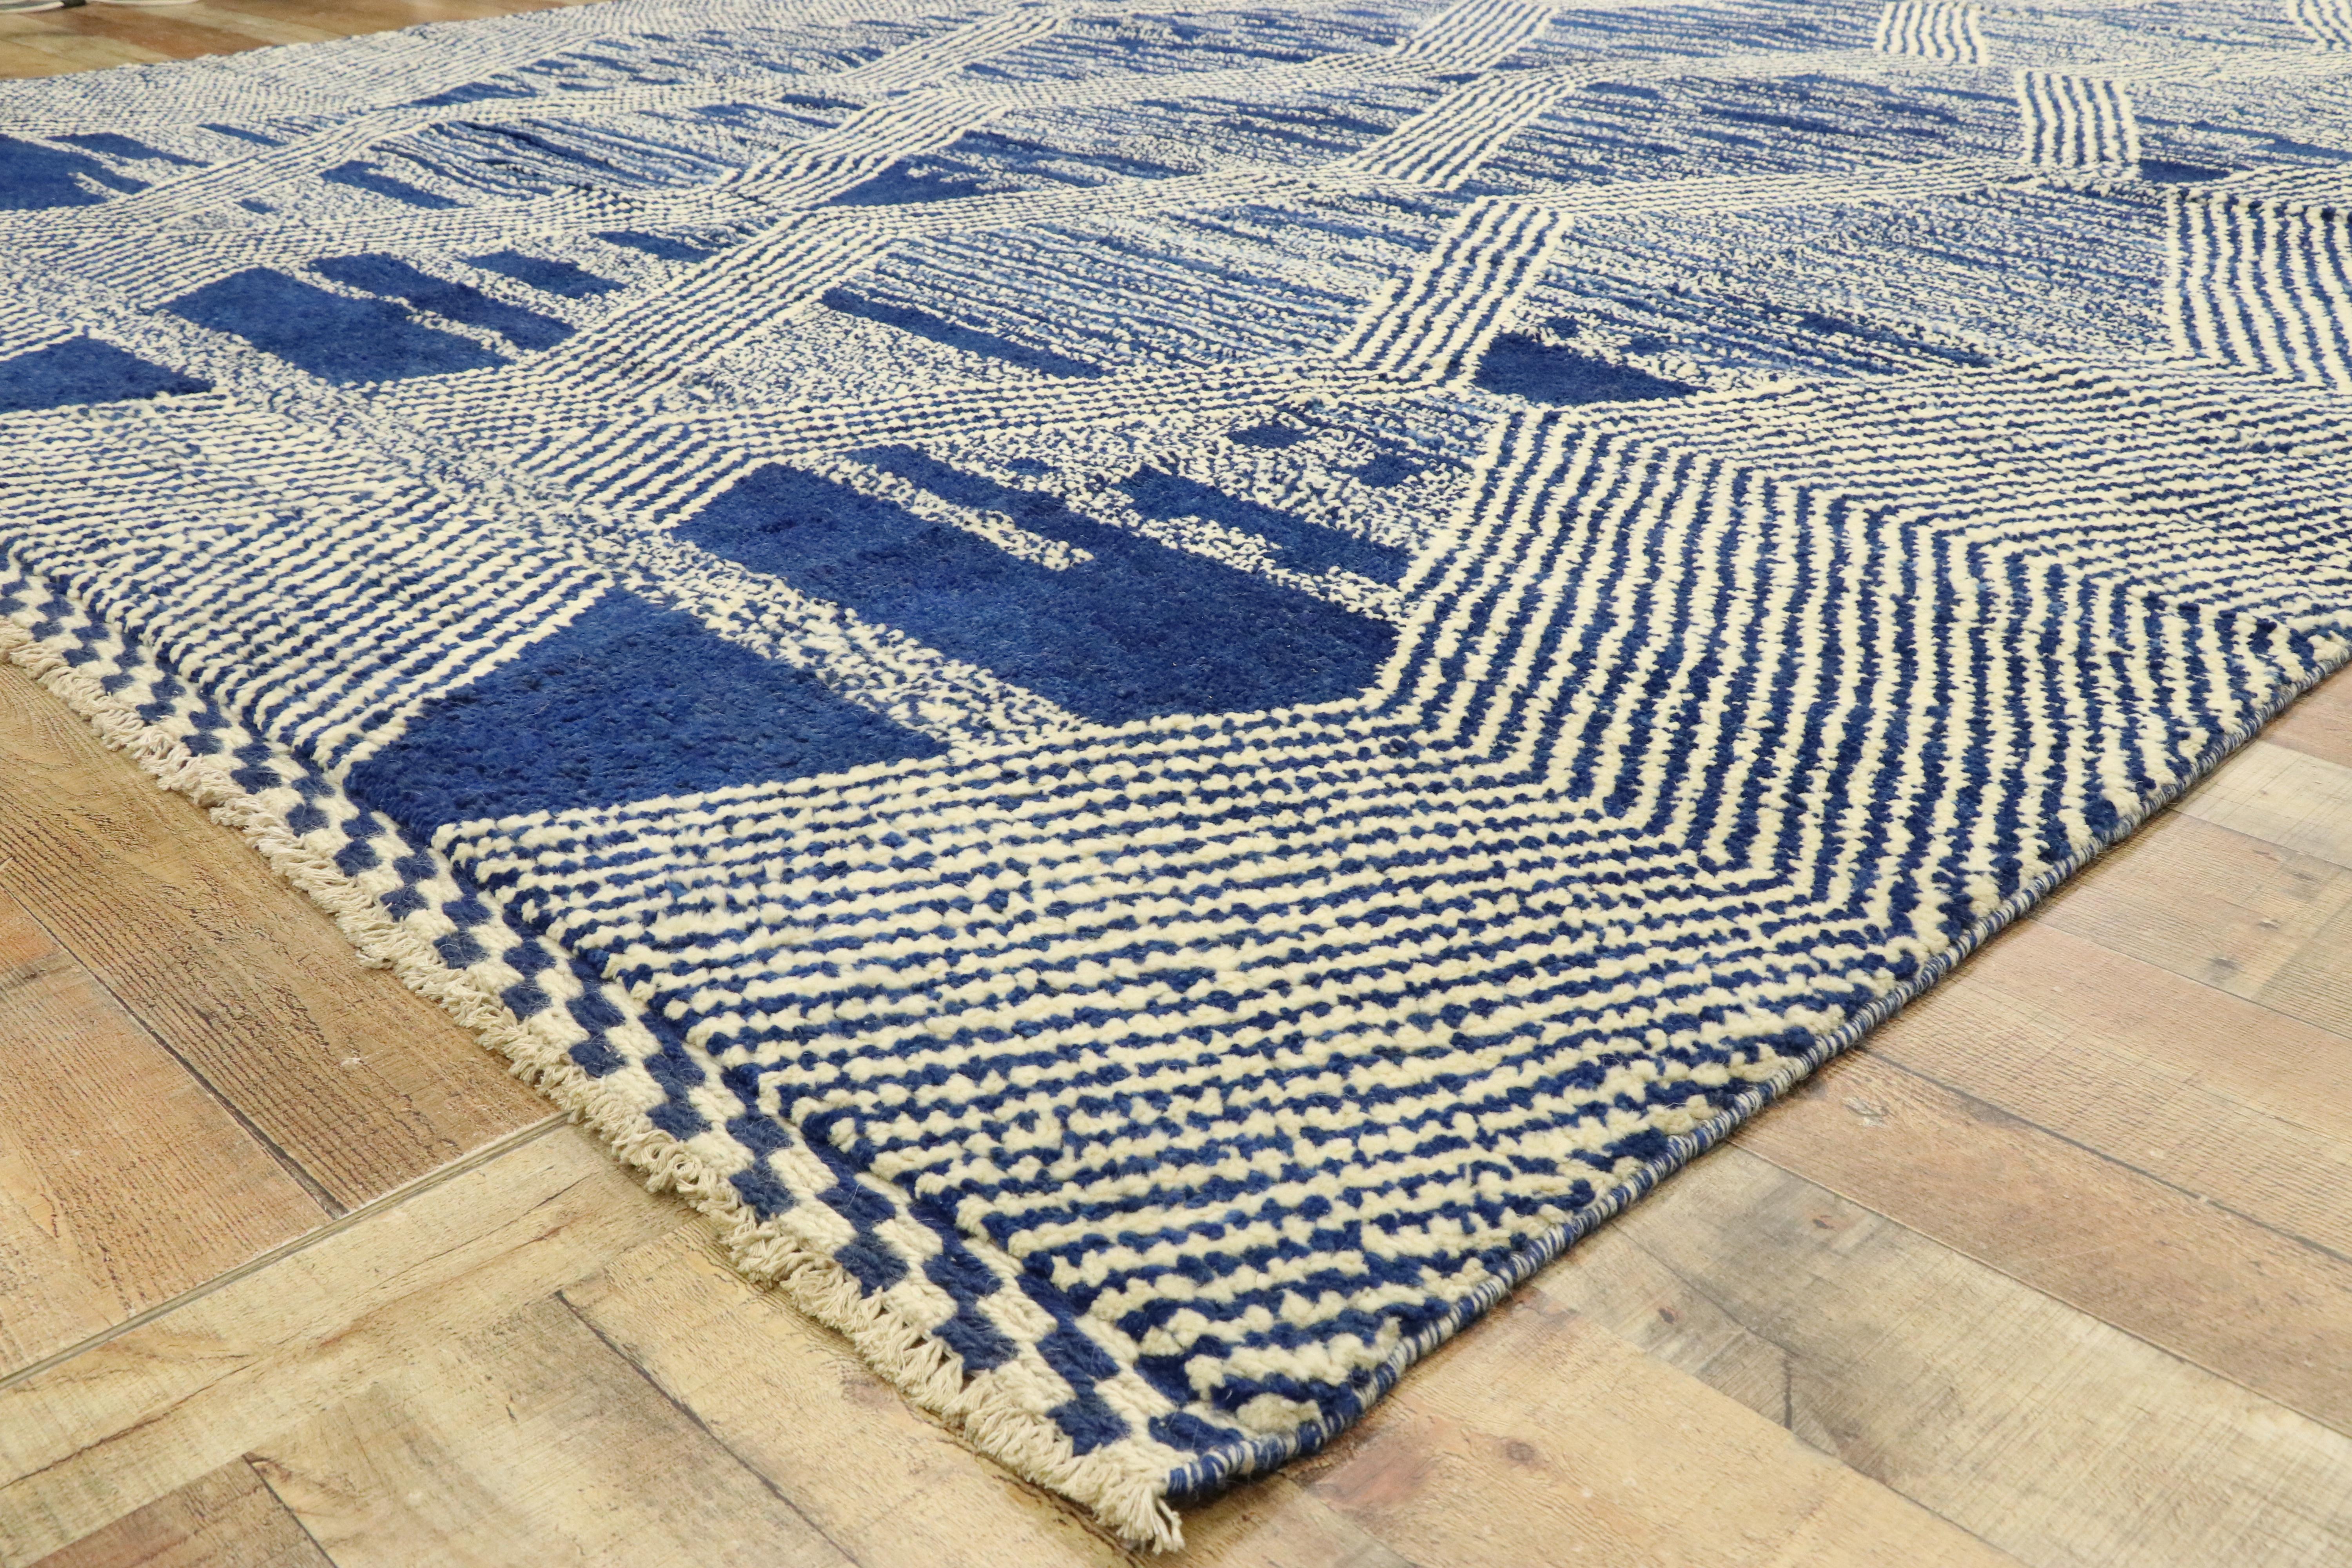 Large Blue Modern Moroccan Rug, Deconstructivism Meets Cozy Nomad In New Condition For Sale In Dallas, TX